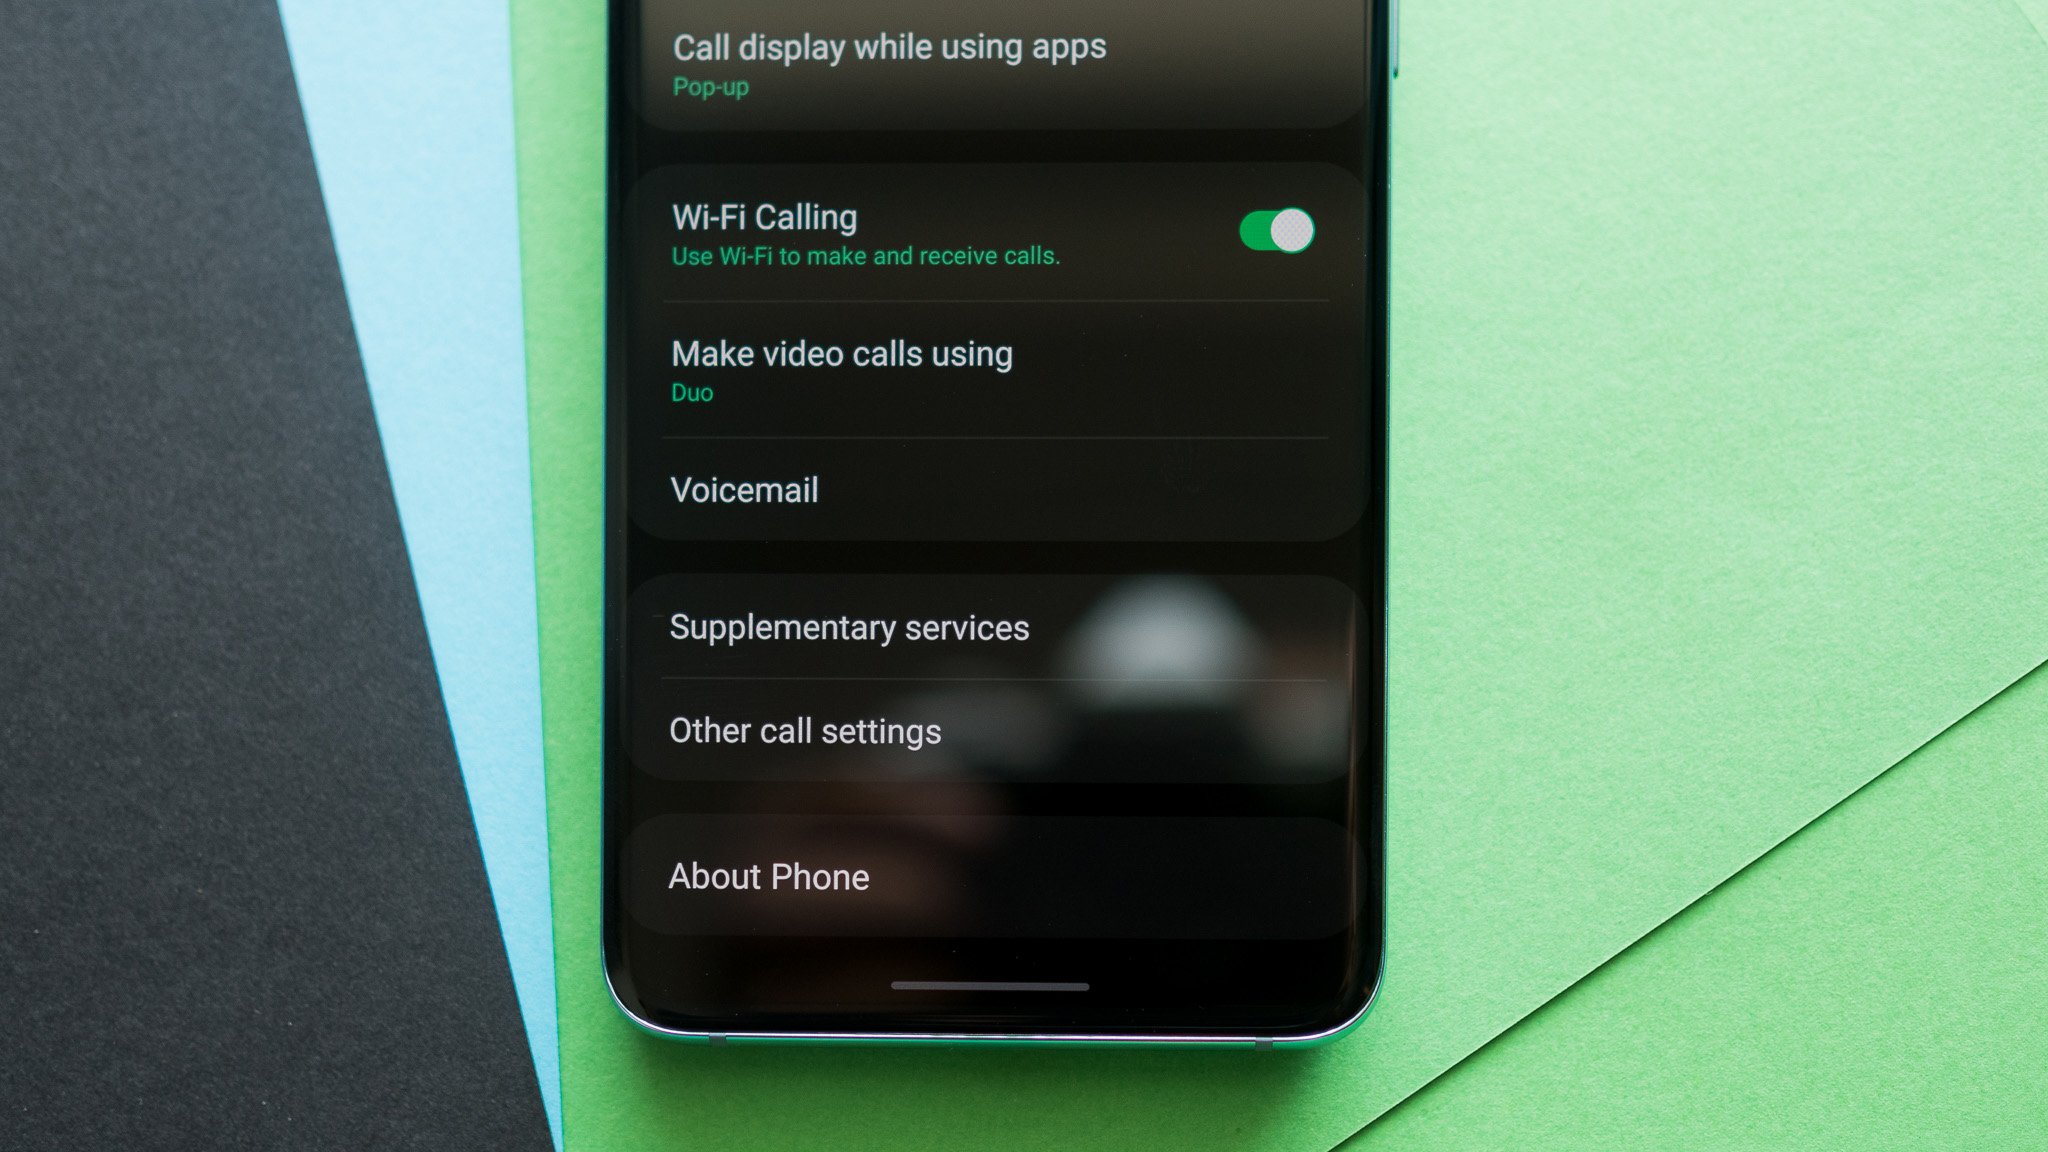 How to enable Wi-Fi Calling on the Galaxy S20